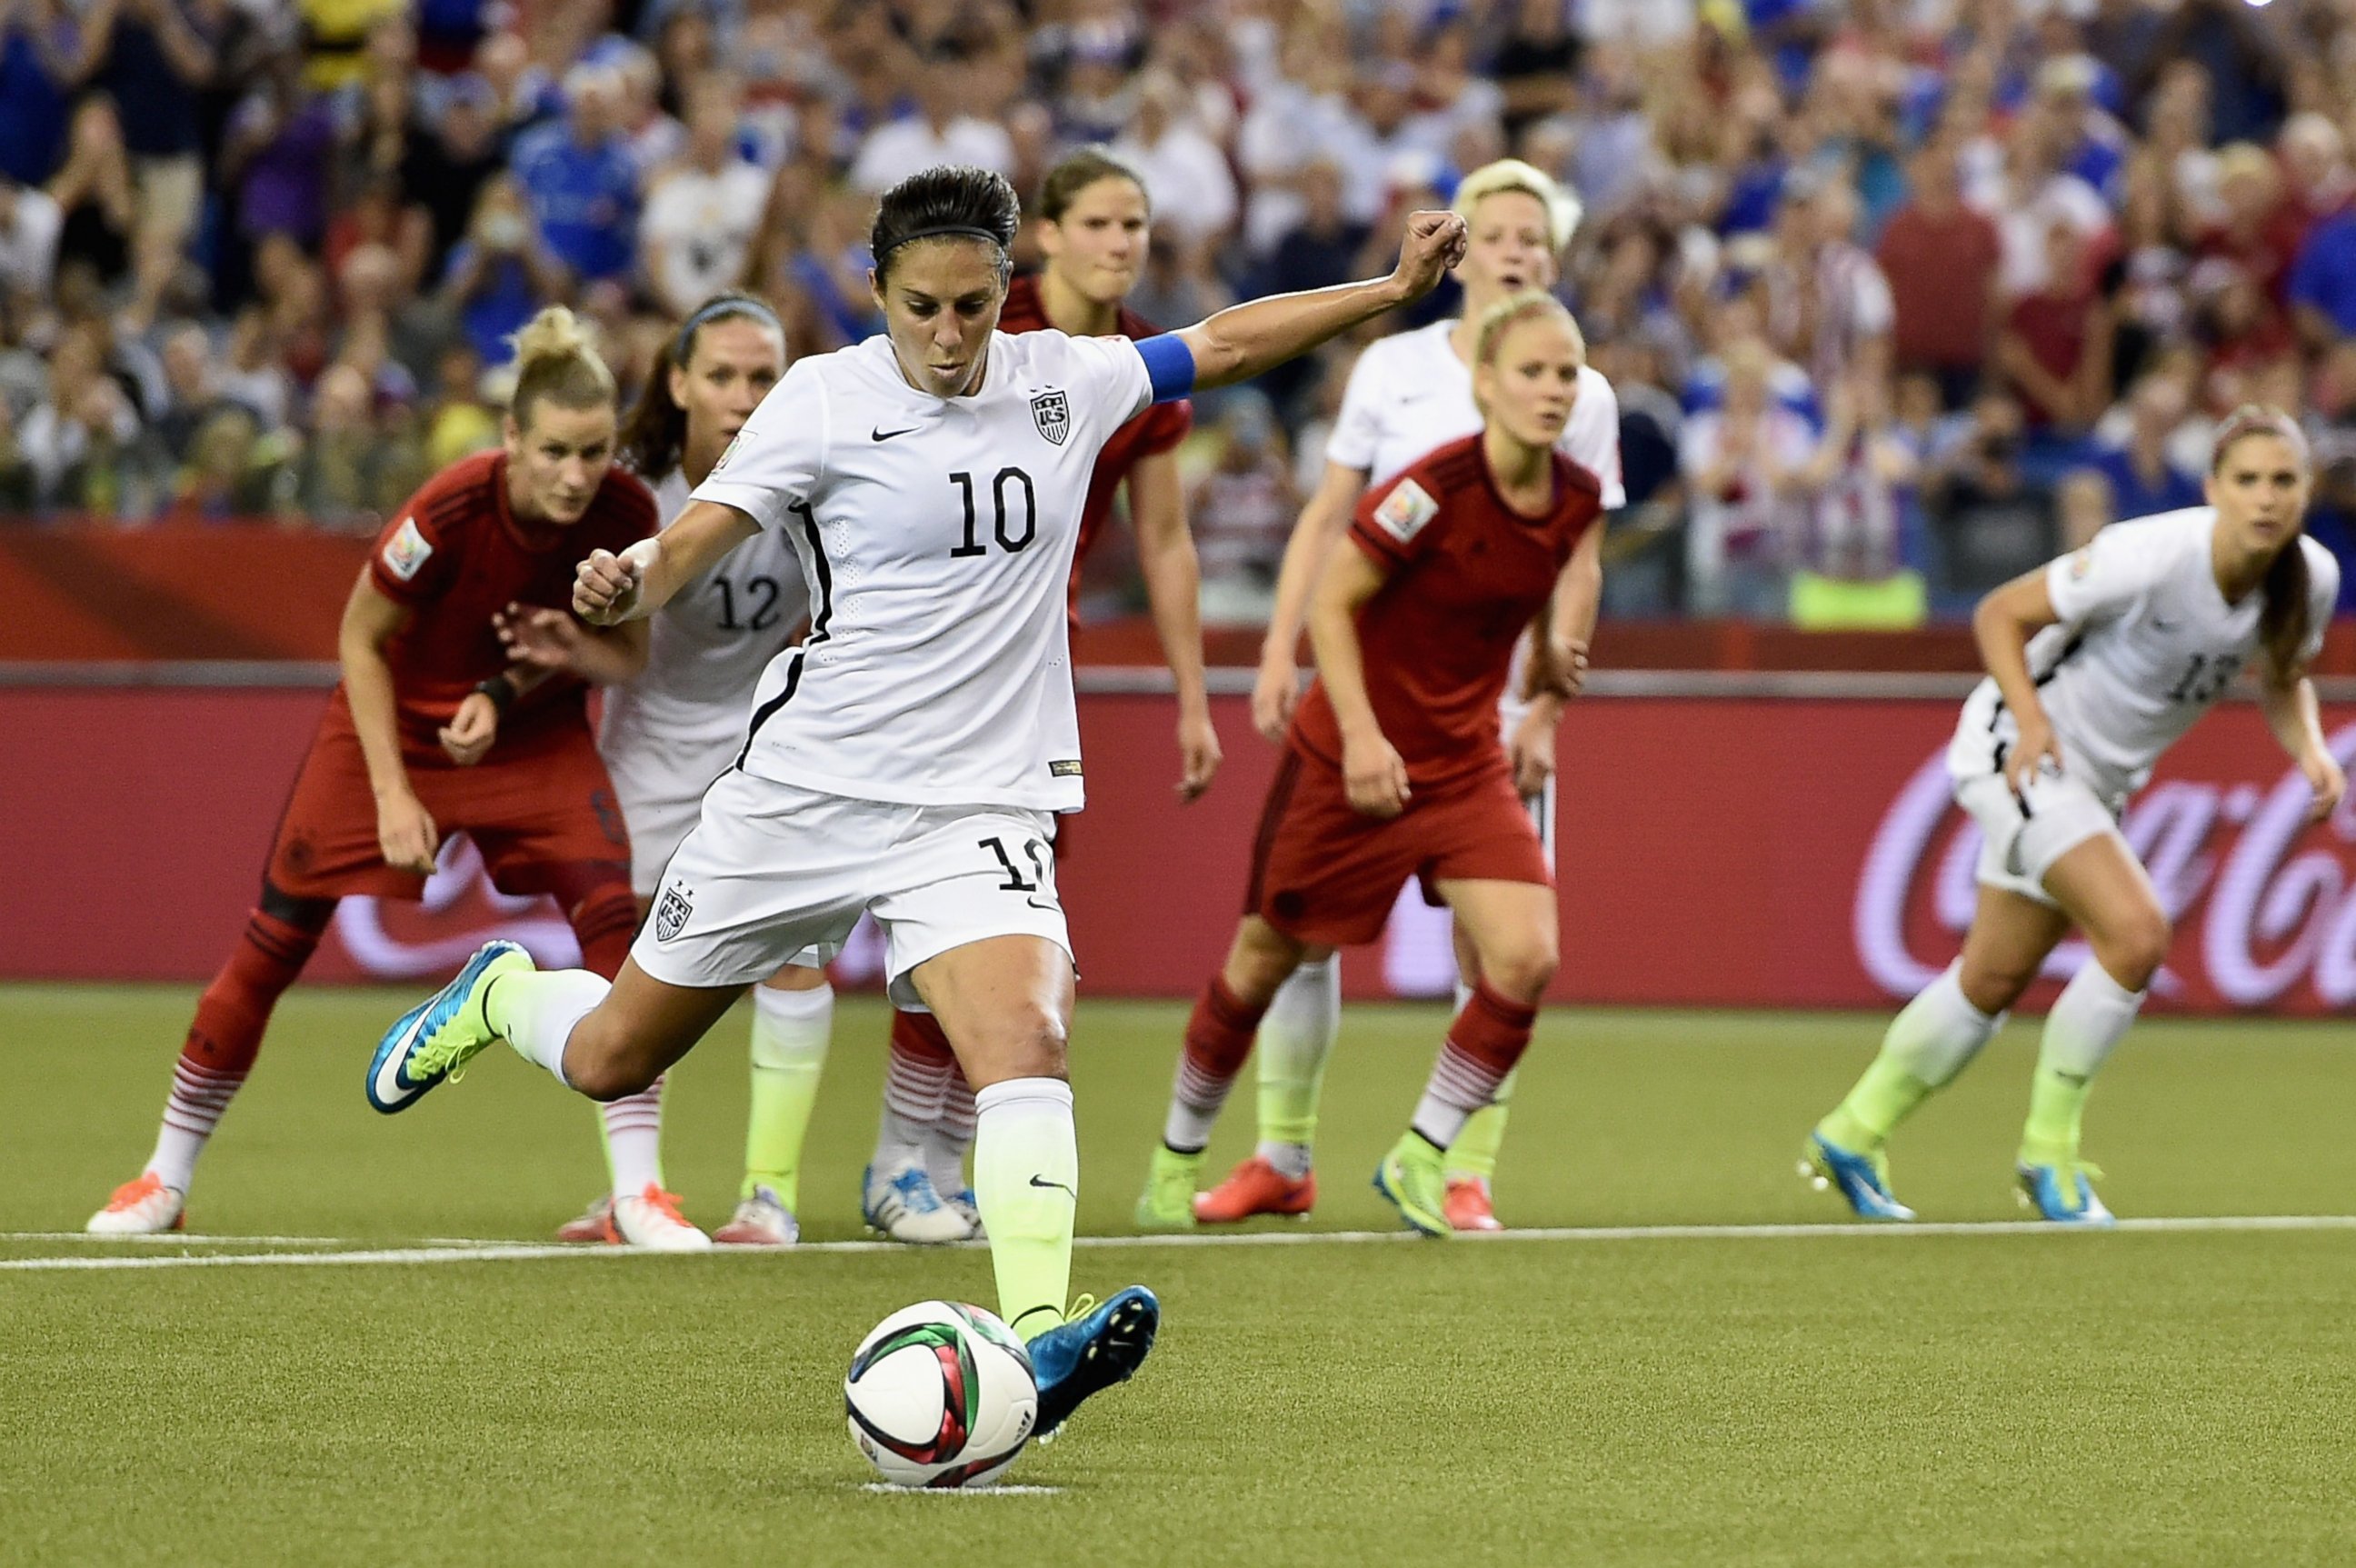 PHOTO: Carli Lloyd of U.S. scores the opening goal from a penalty in the FIFA Women's World Cup 2015 Semifinal Match at Olympic Stadium, June 30, 2015, in Montreal, Canada.